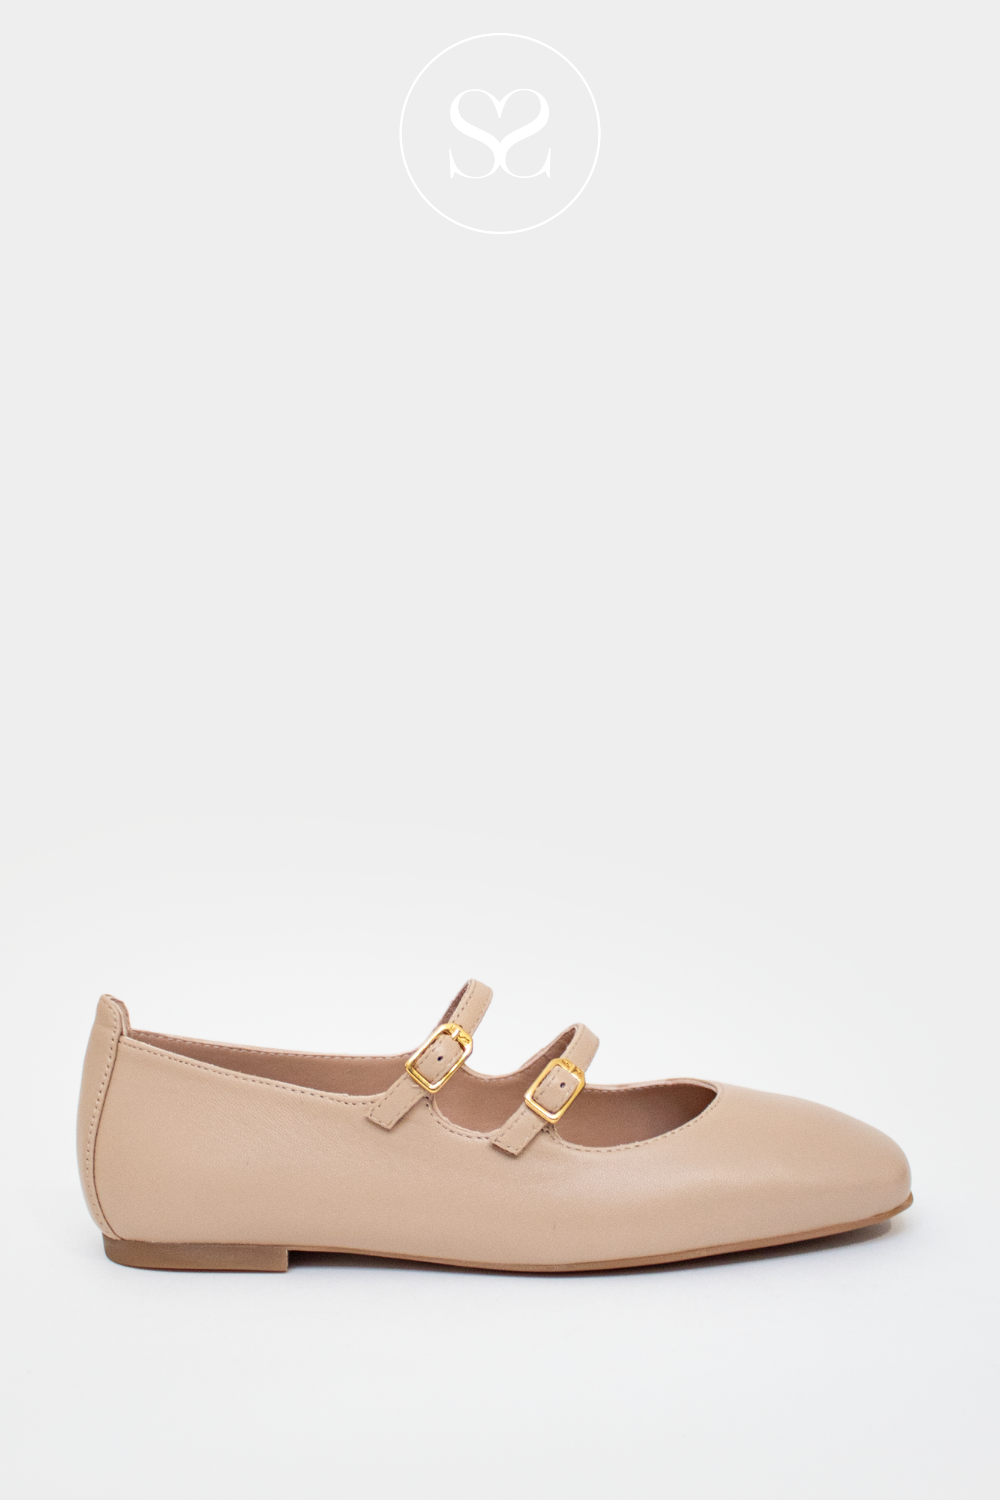 UNISA BERLEY NUDE LEATHER DOUBLE STRAPPED PUMPS